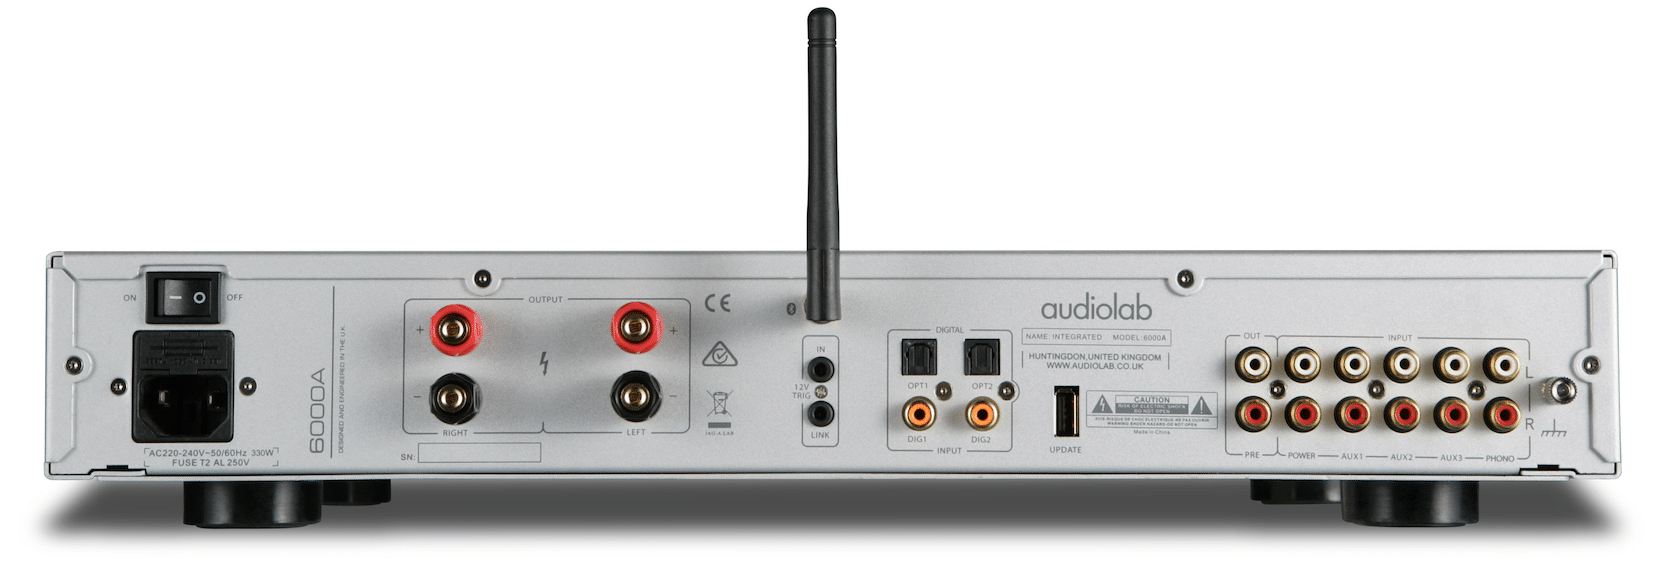 6000A integrated amplifier From Audiolab 